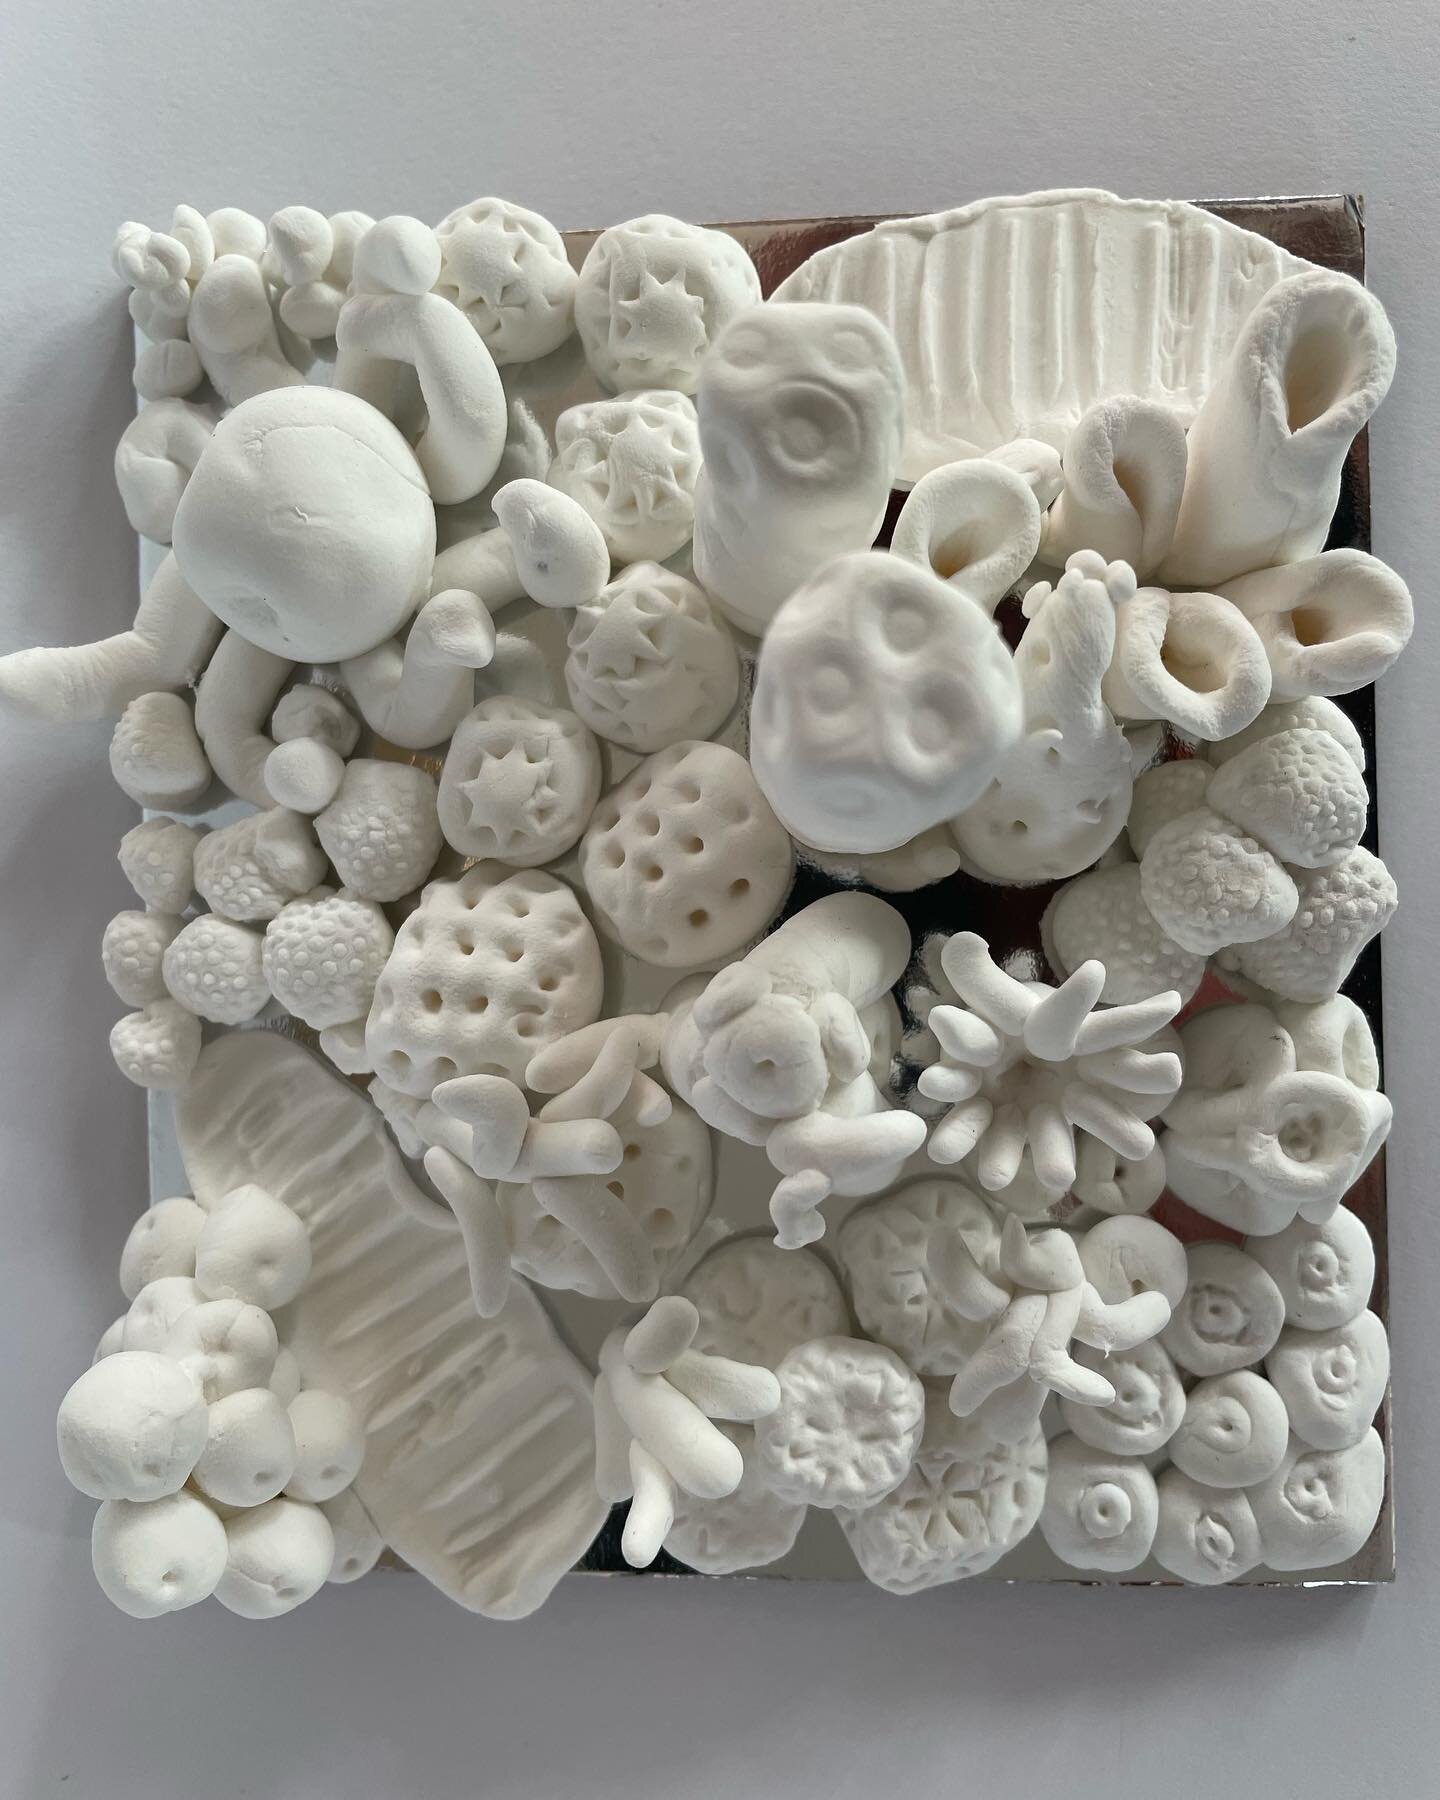 Inspired by the stunning work of Courtney Mattison and a recent workshop I attended at Zart, the students created these incredible coral reef sculptures. Choosing to keep them white as a comment on coral bleaching these amazing works are a beautiful 